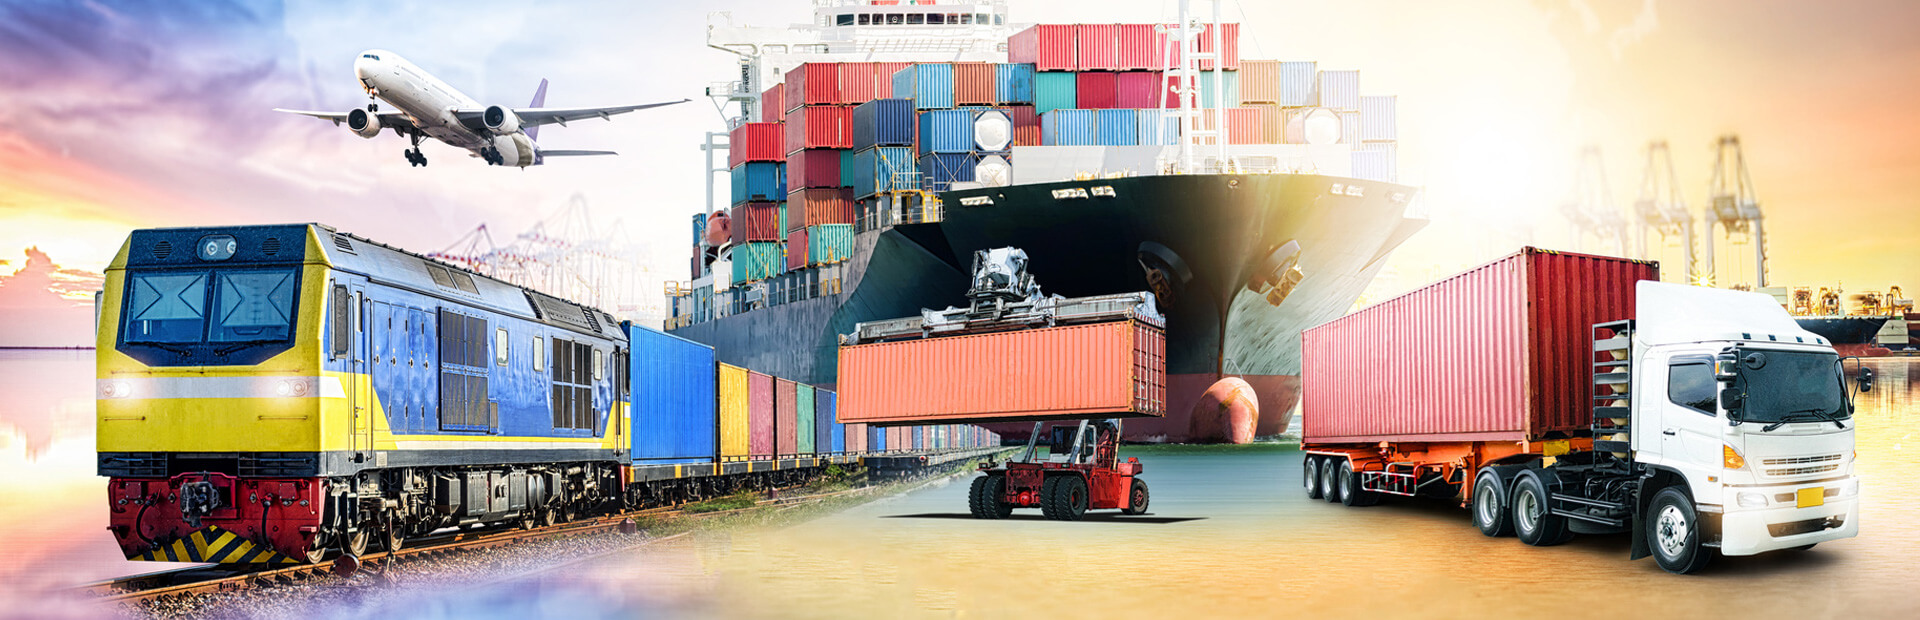 Imports and Exports - Customs Processing